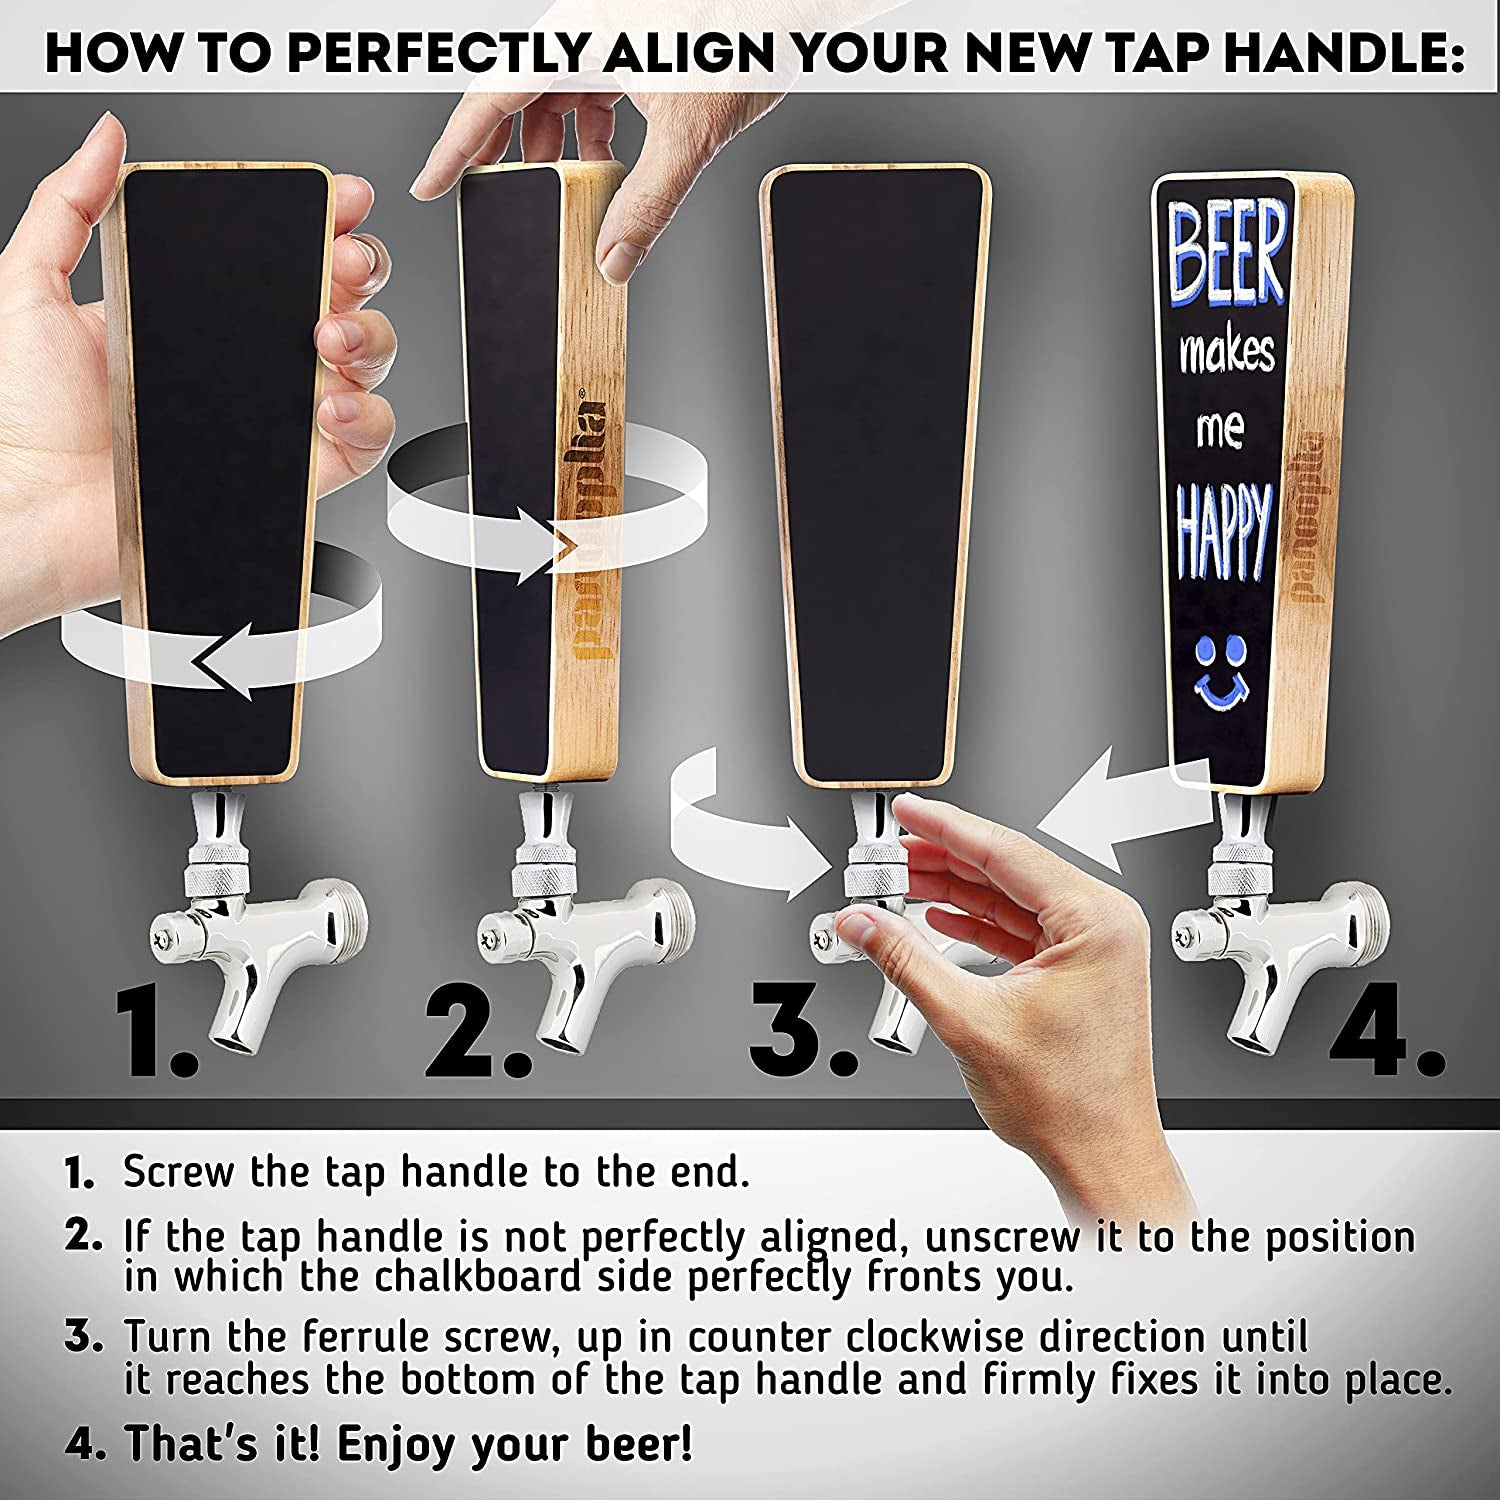 Beer Tap Handle and Two Liquid Chalk Markers Set - Wooden Keg Taps Handles for Standard Faucets and Kegerators with Reusable Chalkboard - Suitable for Home Brew, Bars, Kegs and Draft Beer